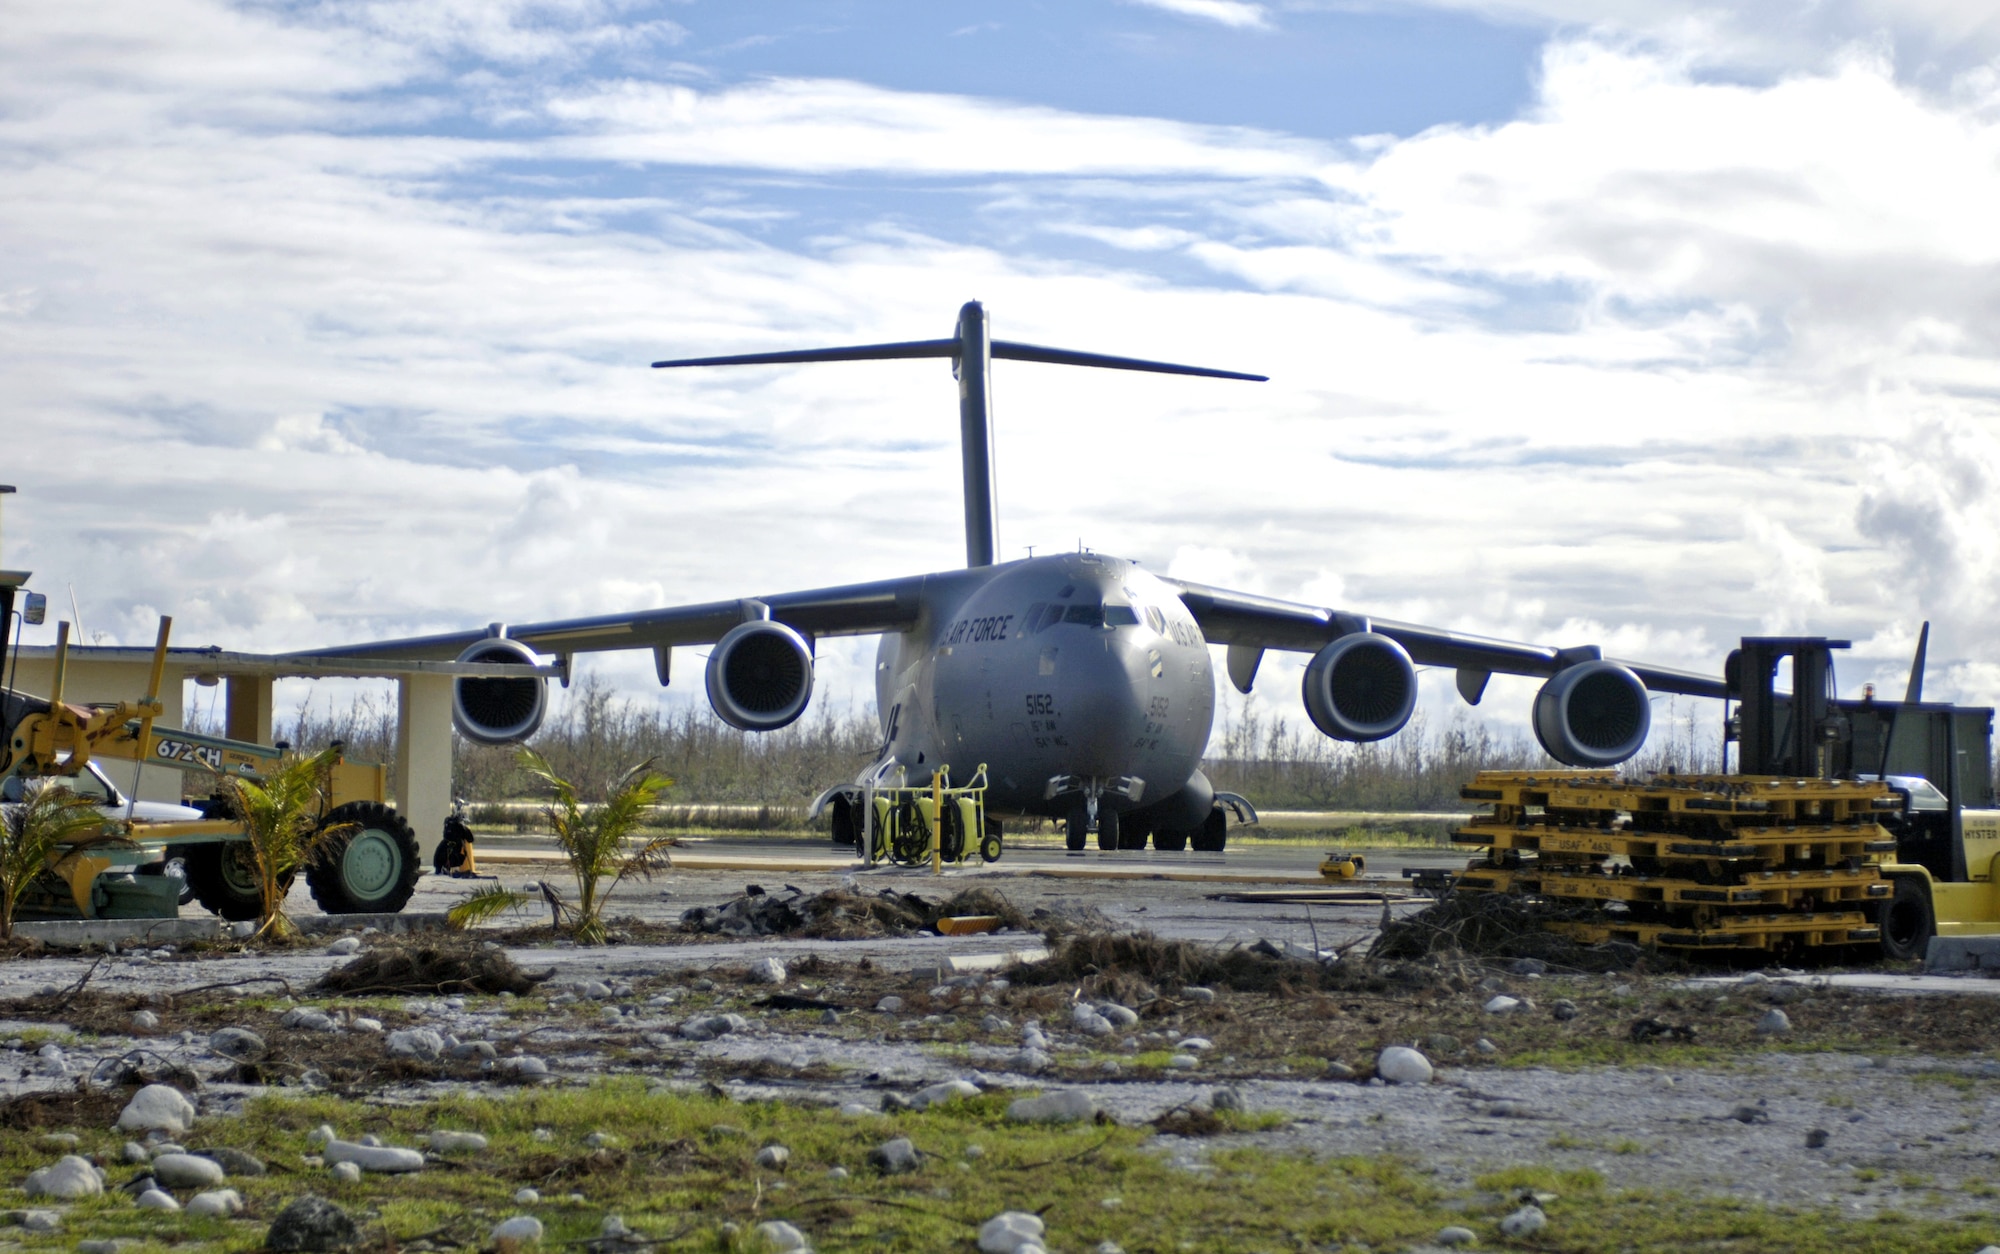 A C-17 Globemaster III sits on the flightline at Wake Island Sept. 12. Debris and coral are signs of the destruction left by Super Typhoon Ioke after it hit the island Aug. 31. The C-17 Globemaster III is from Hickam Air Force Base, Hawaii, and brought a 53-person team to the island to assess damage left by the typhoon. (U.S. Air Force photo/Tech. Sgt. Shane A. Cuomo) 

